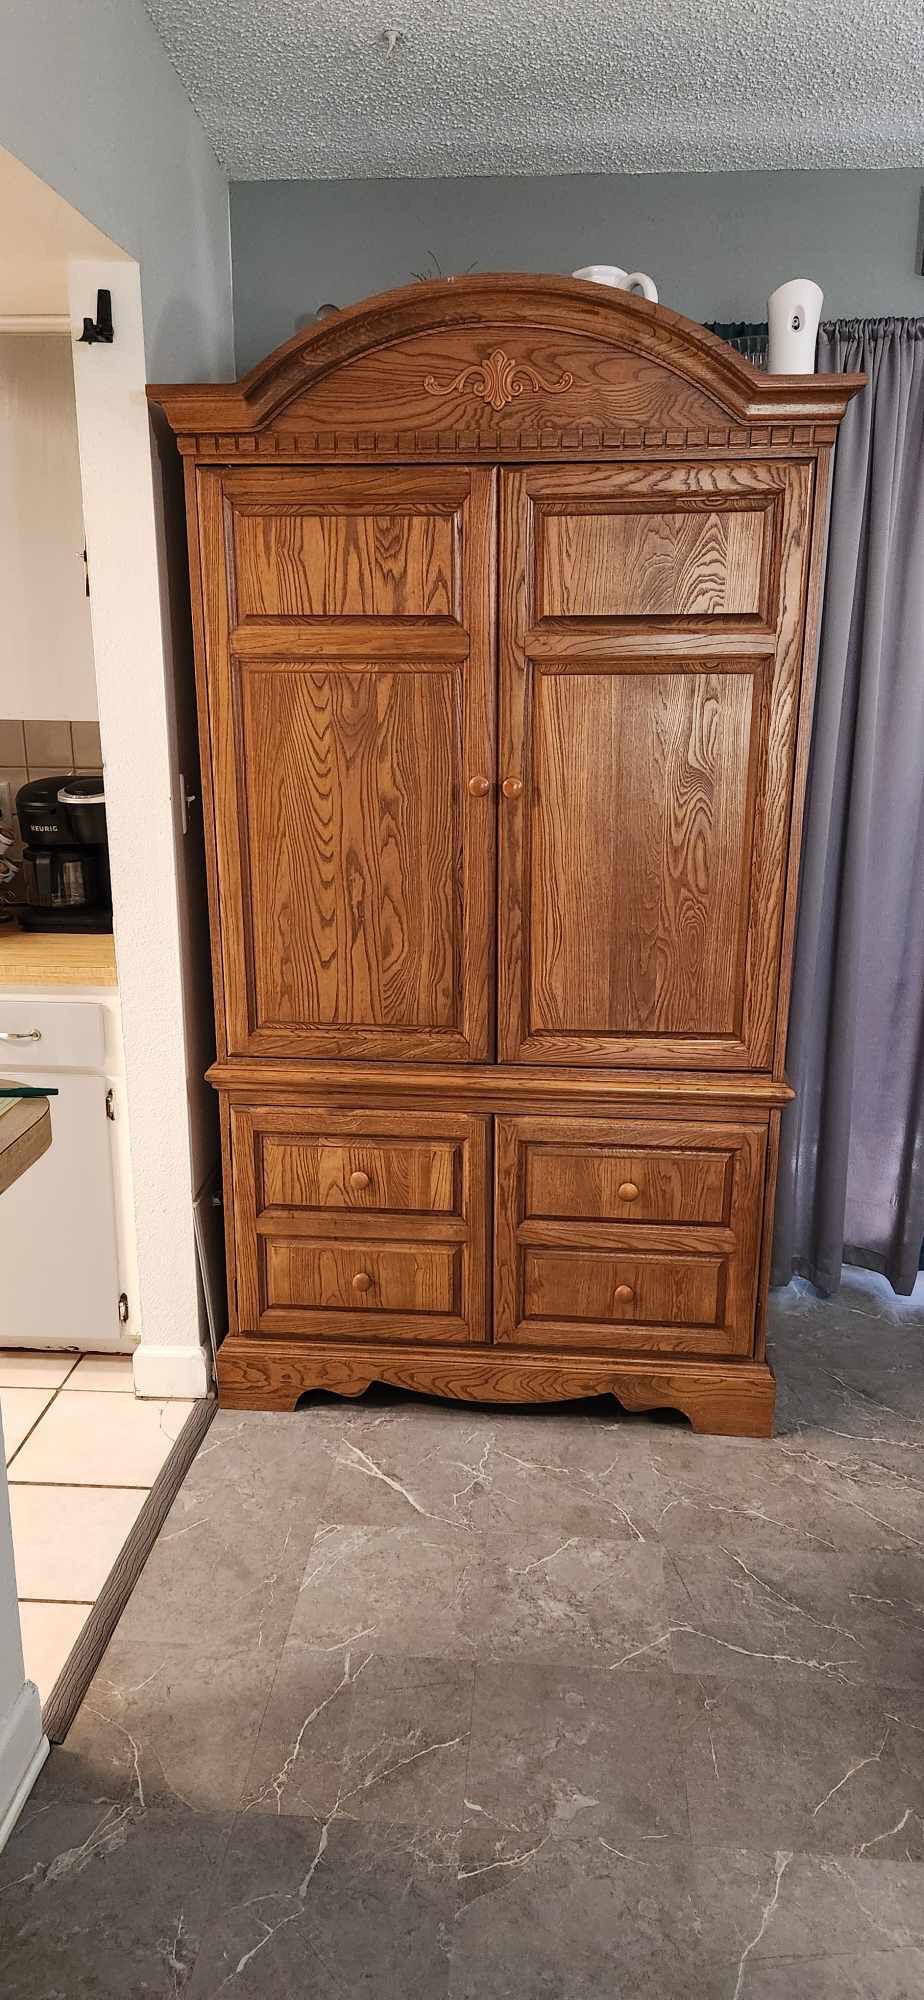 Armoire Used As Pantry